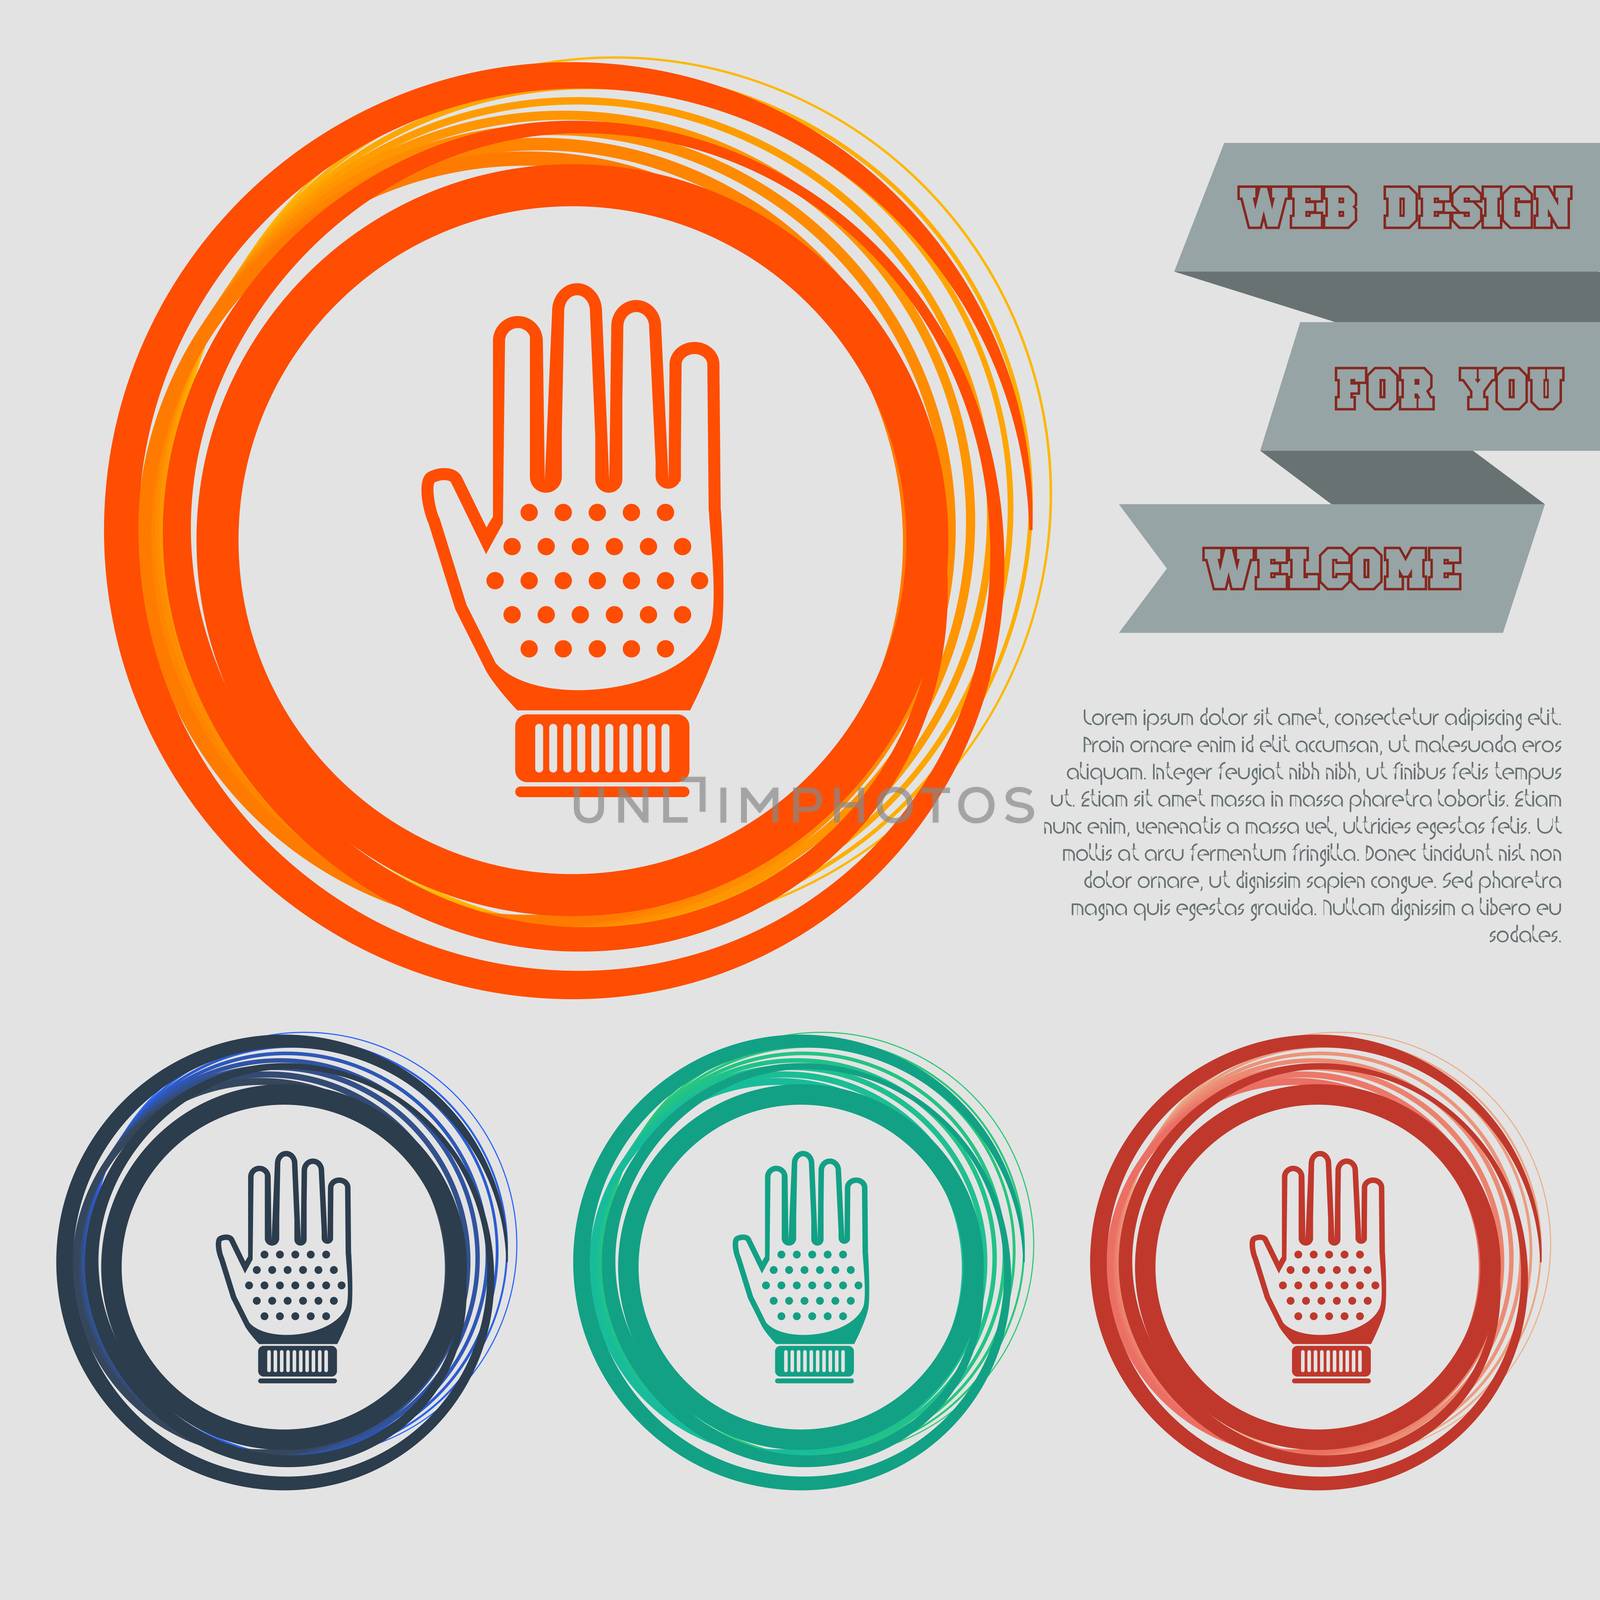 gloves icon on the red, blue, green, orange buttons for your website and design with space text. illustration